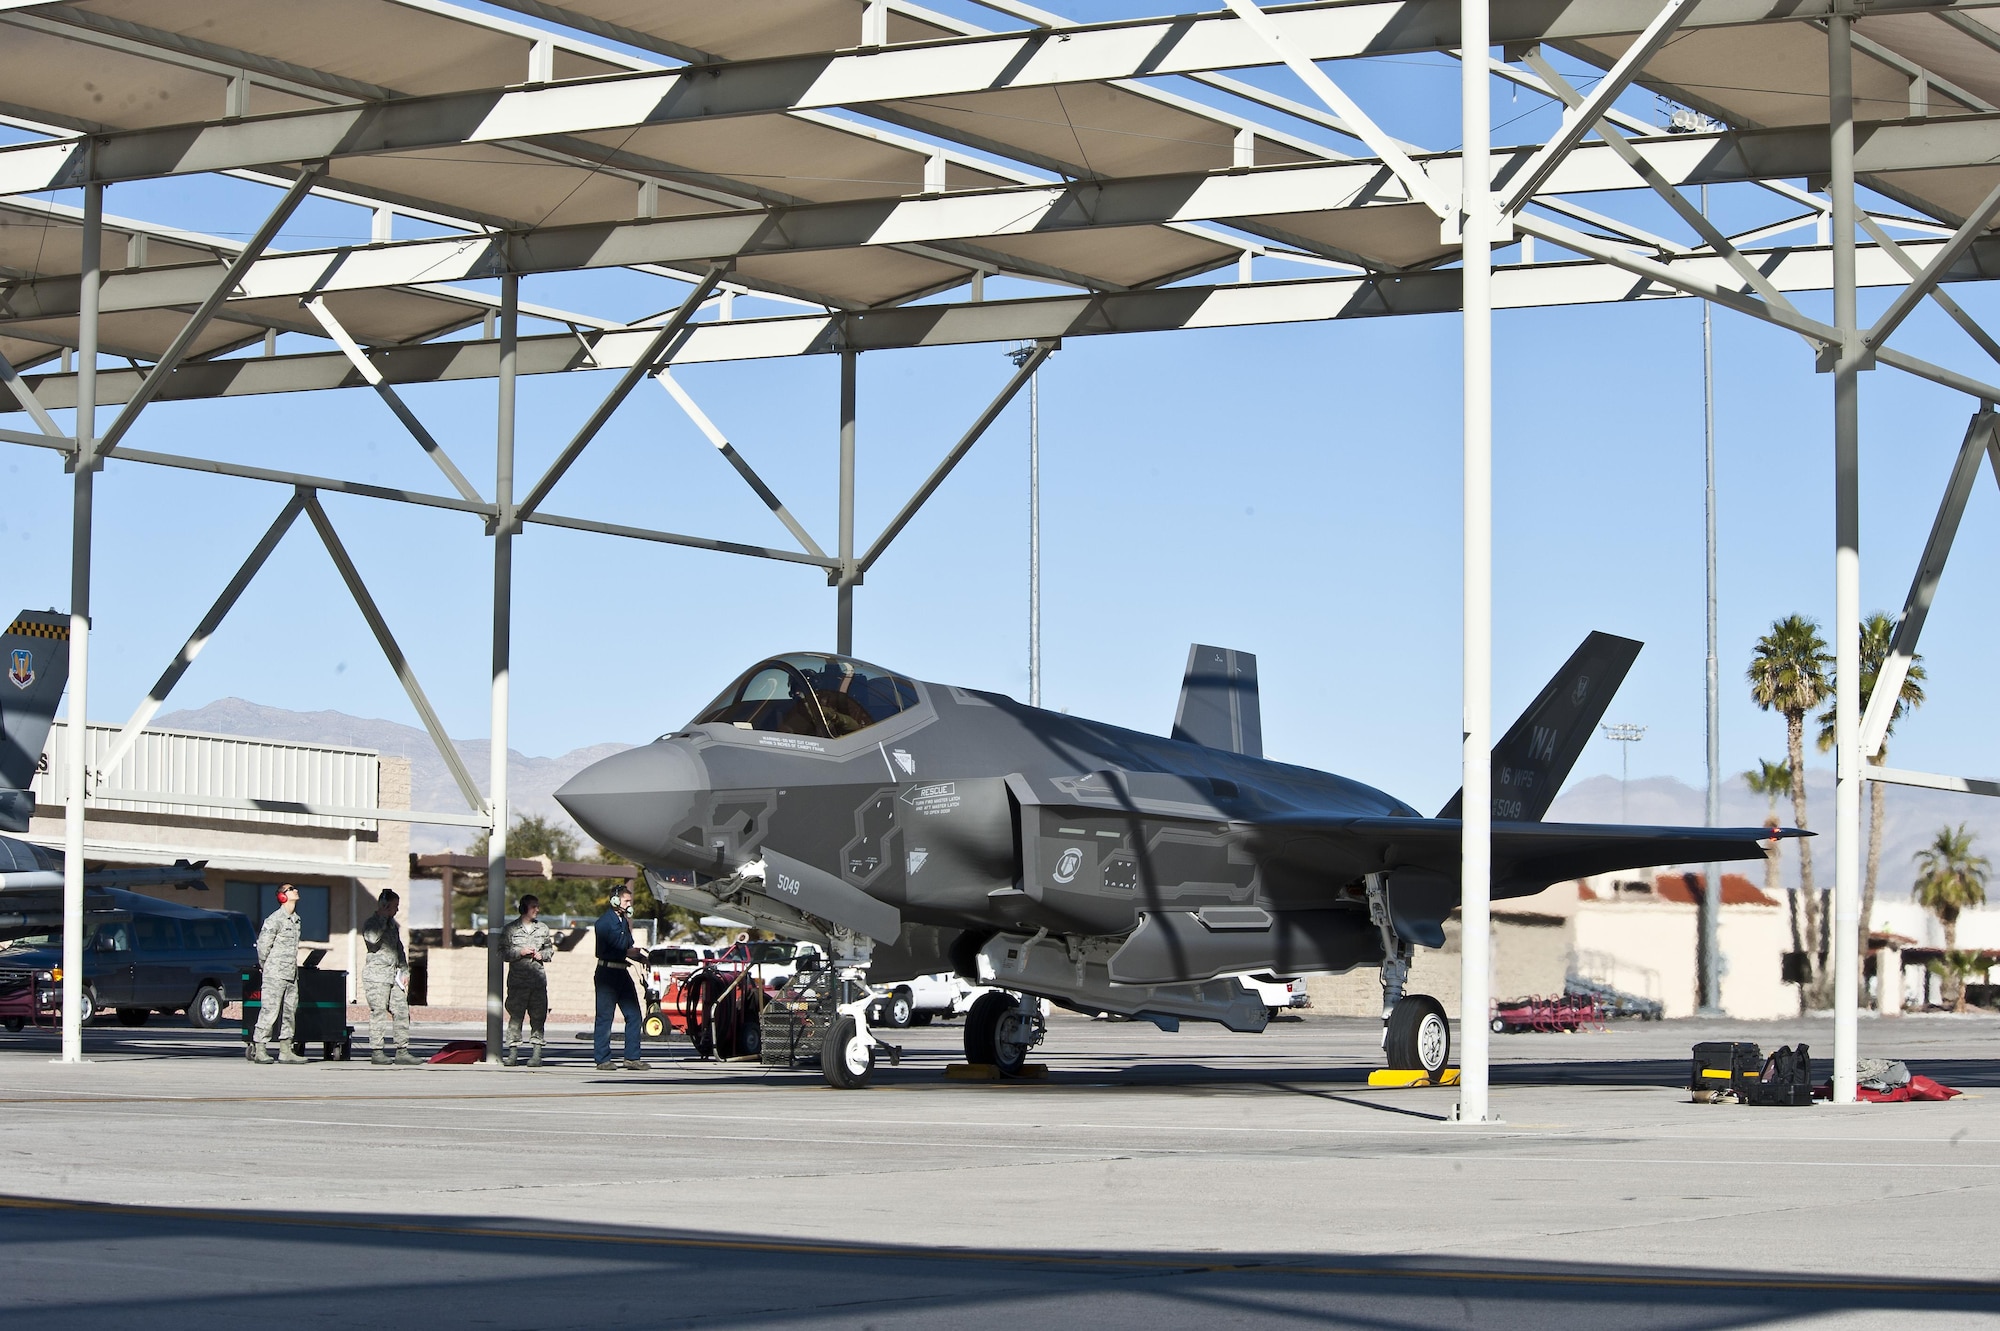 An F-35 sits under a sun shade on the flightline at Nellis Air Force Base, Nevada. The Air Force Small Business Innovation Research/Small Business Technology Transfer program office and a small business partner have developed high-temperature, abrasion-resistant coating to improve reliability and maintainability. The F-35 is but one of the weapon systems to benefit from this technology. (U.S. Air Force photo/Airman 1st Class Mikaley Towle)